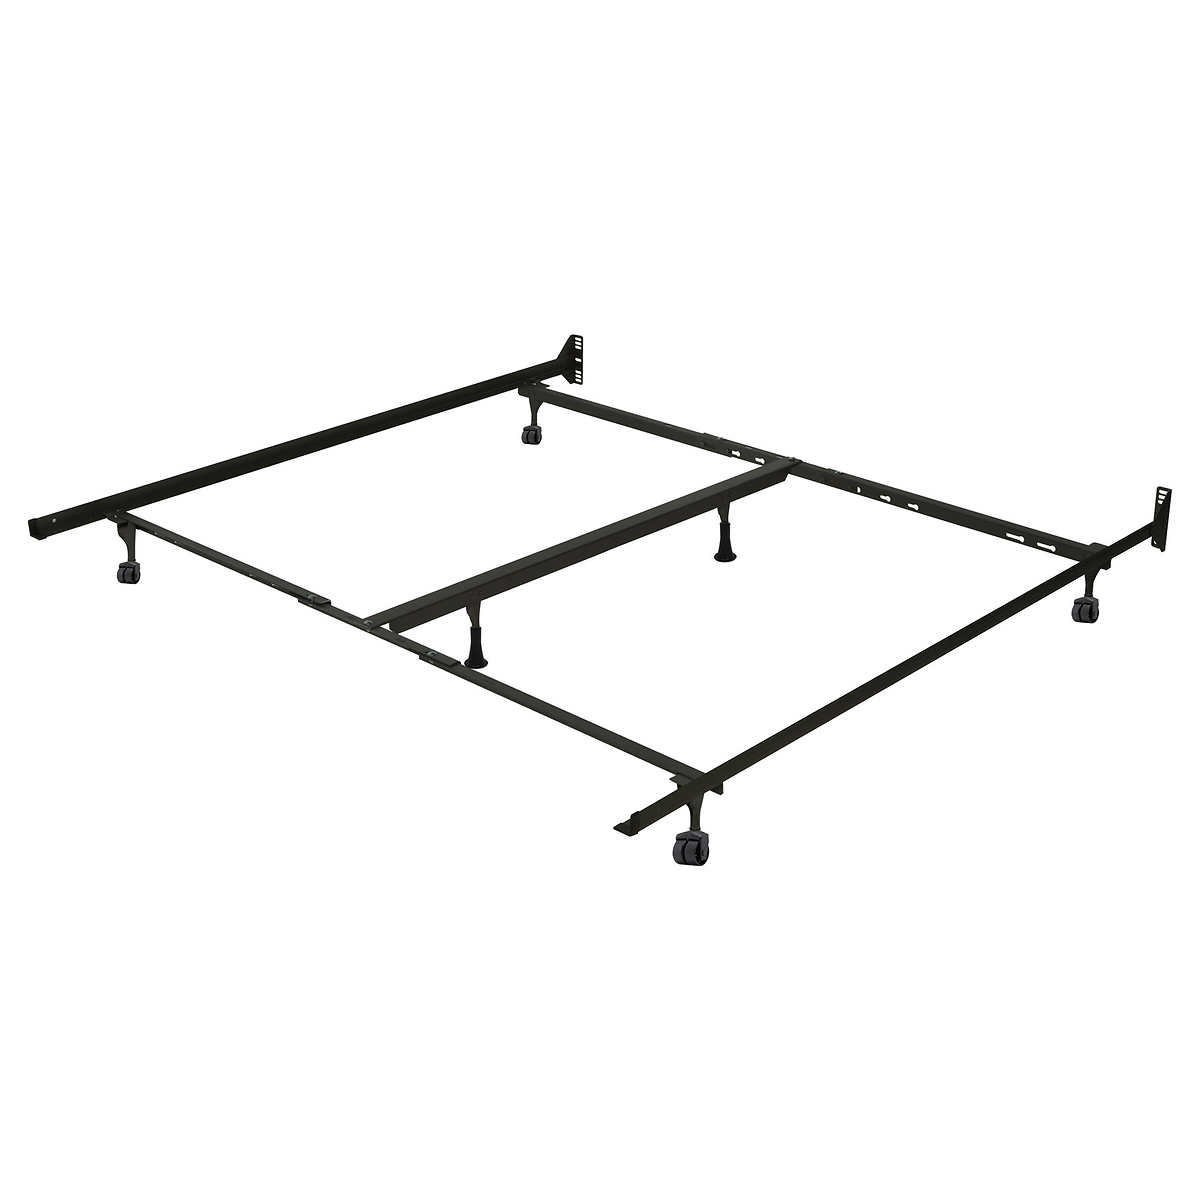 Universal Metal Bed Frame Costco, How To Expand Metal Bed Frame